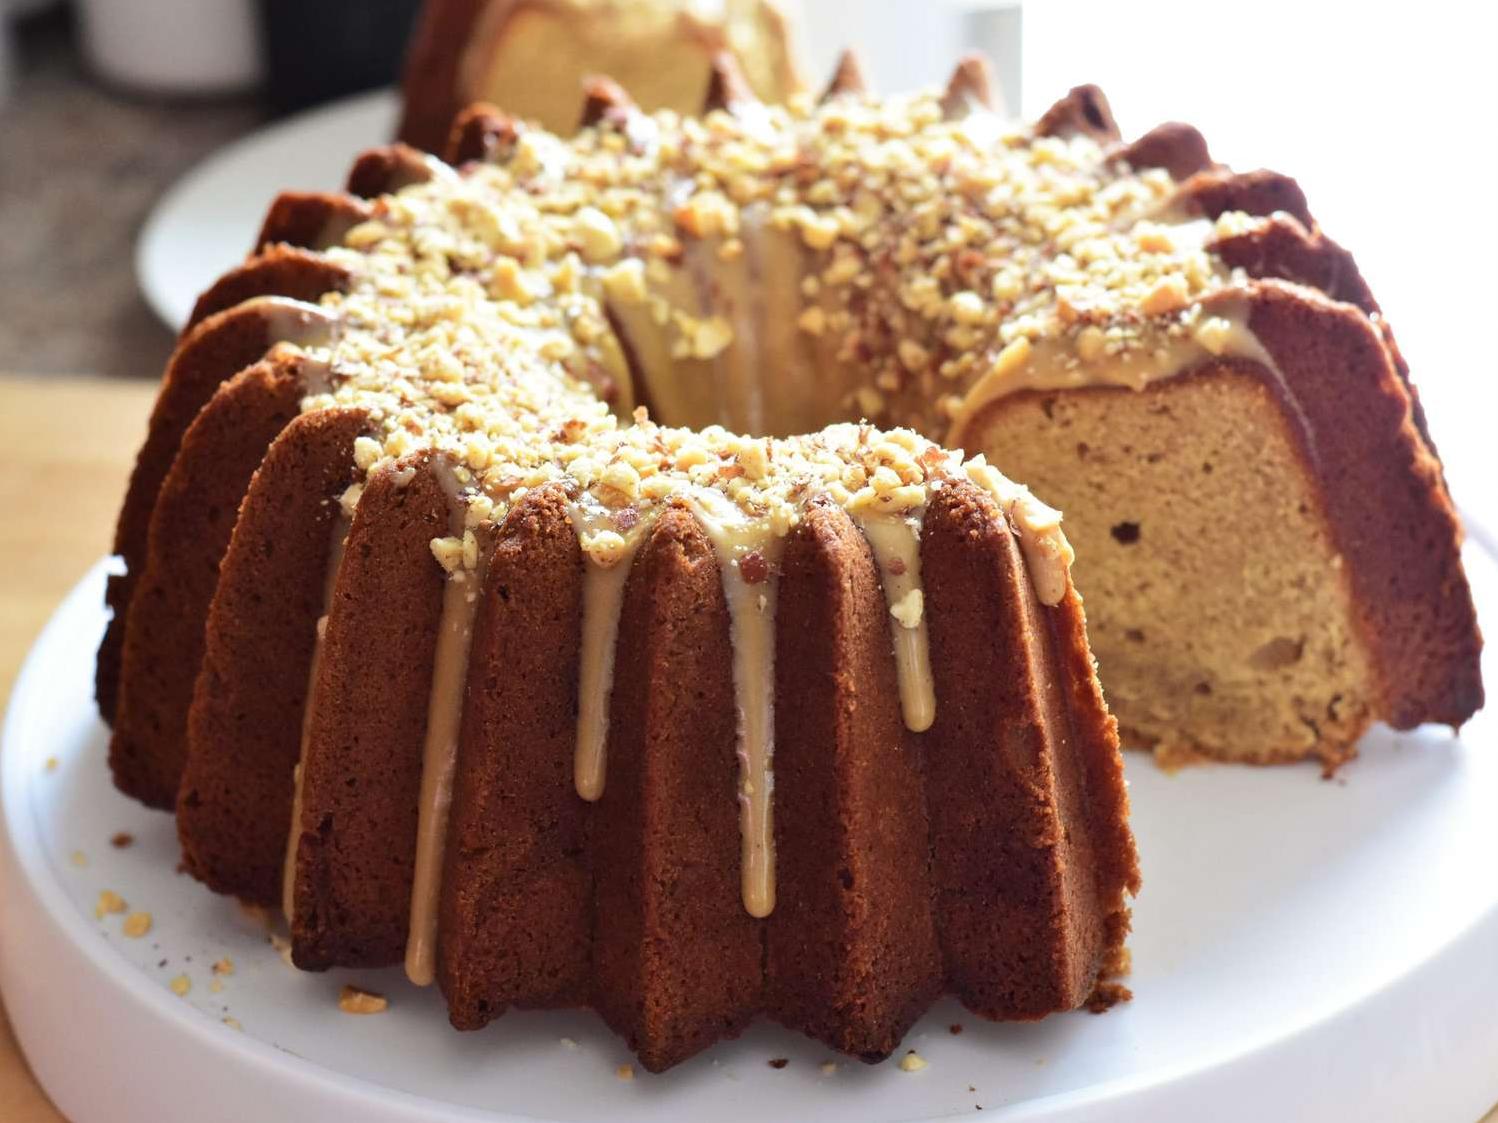  Butter, sugar, eggs, and peanut butter - the secret to the perfect pound cake